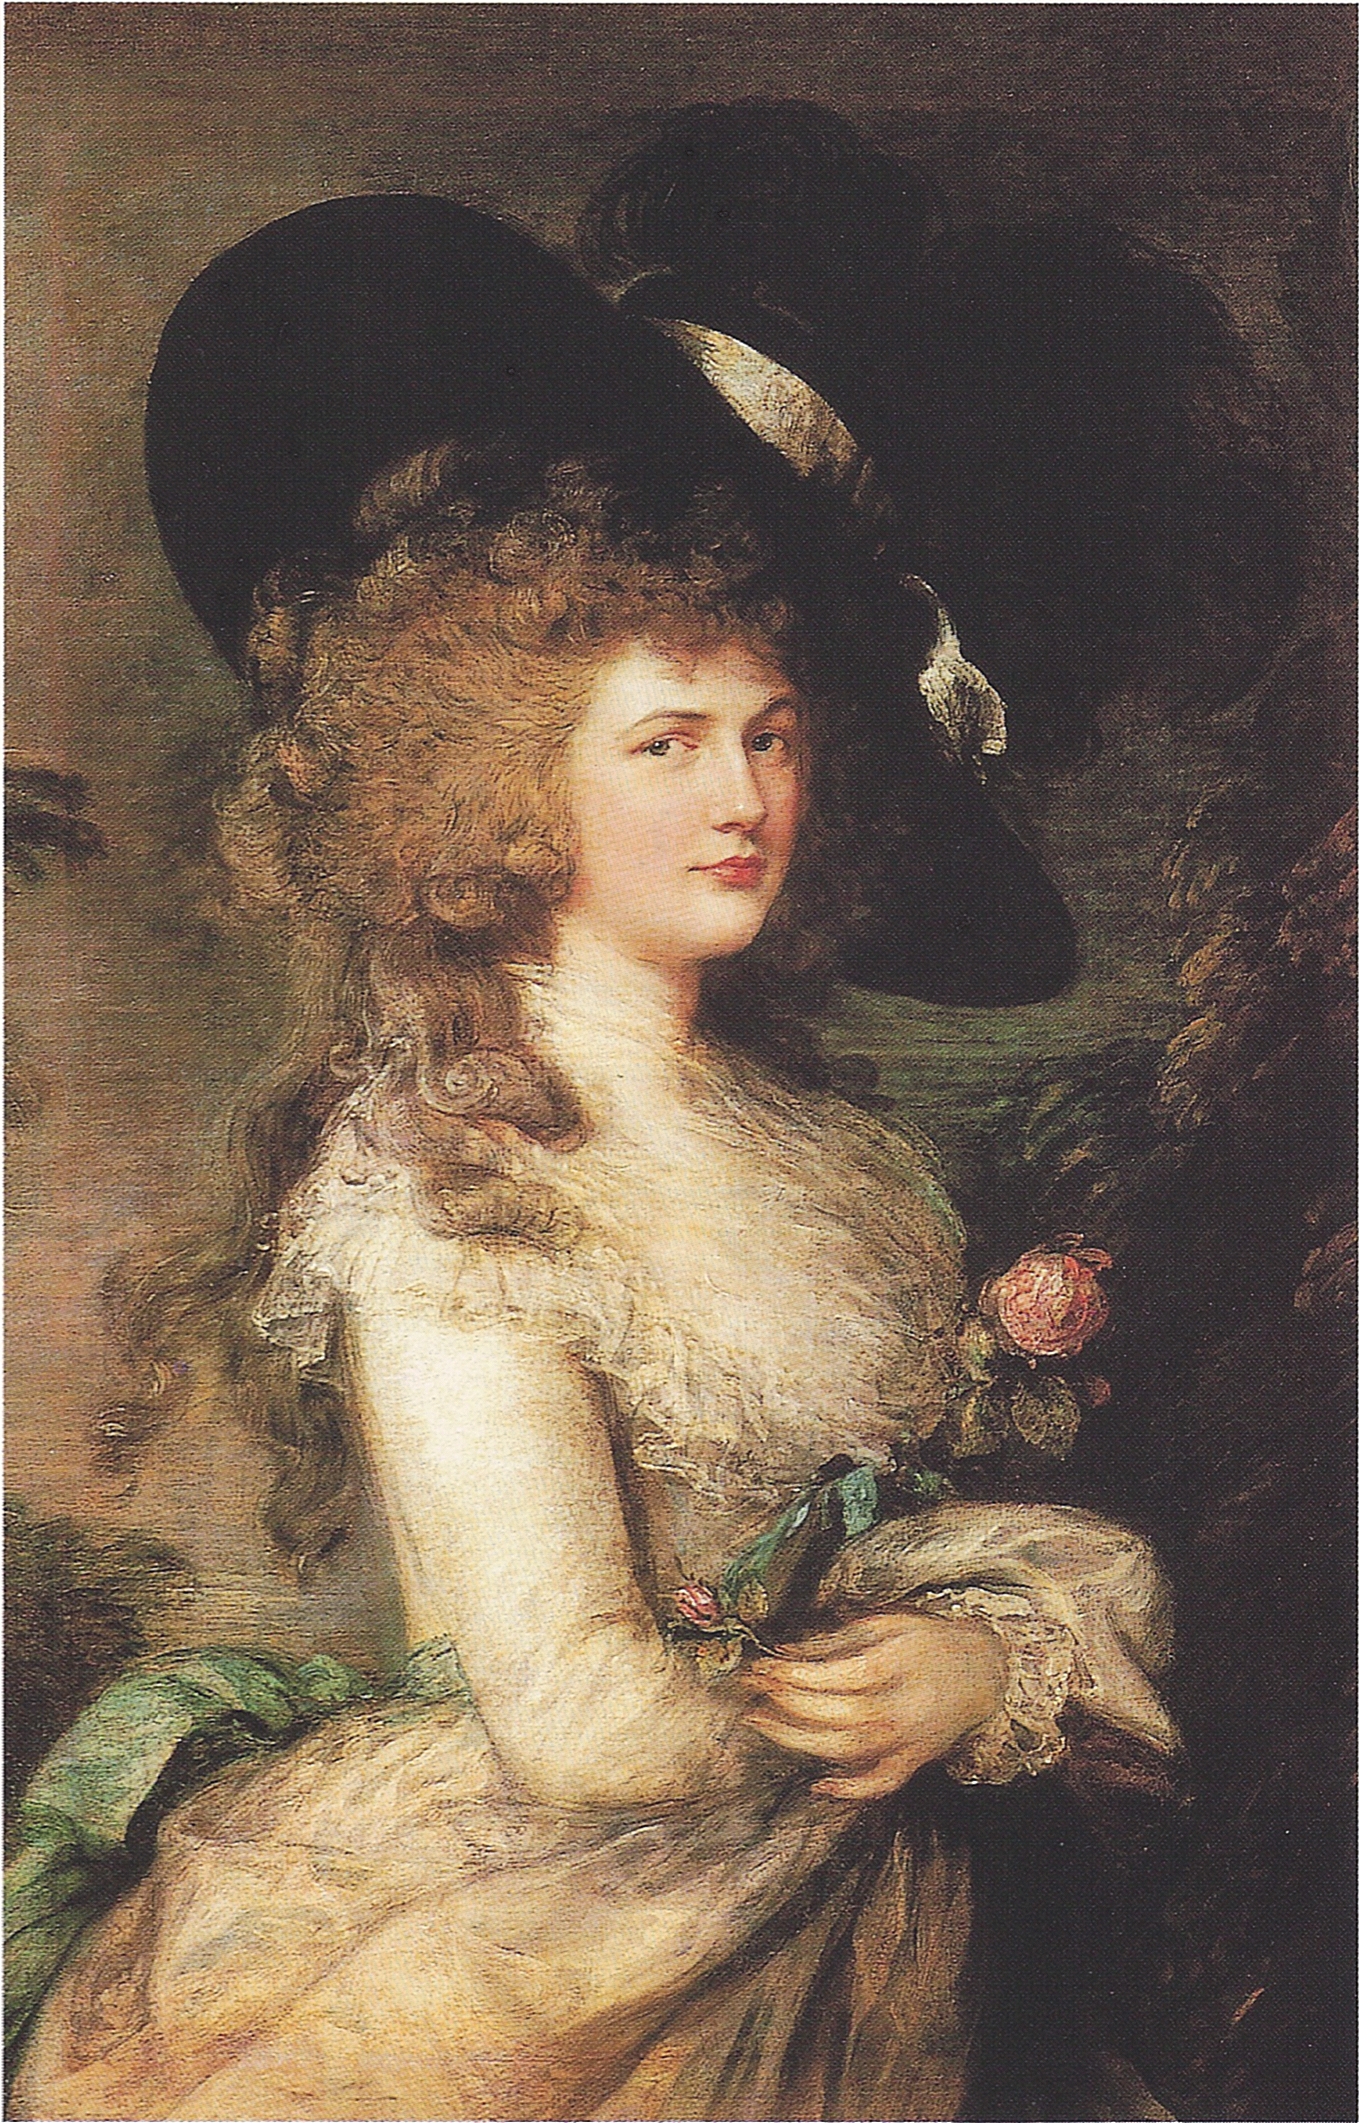 Gainsbourgh